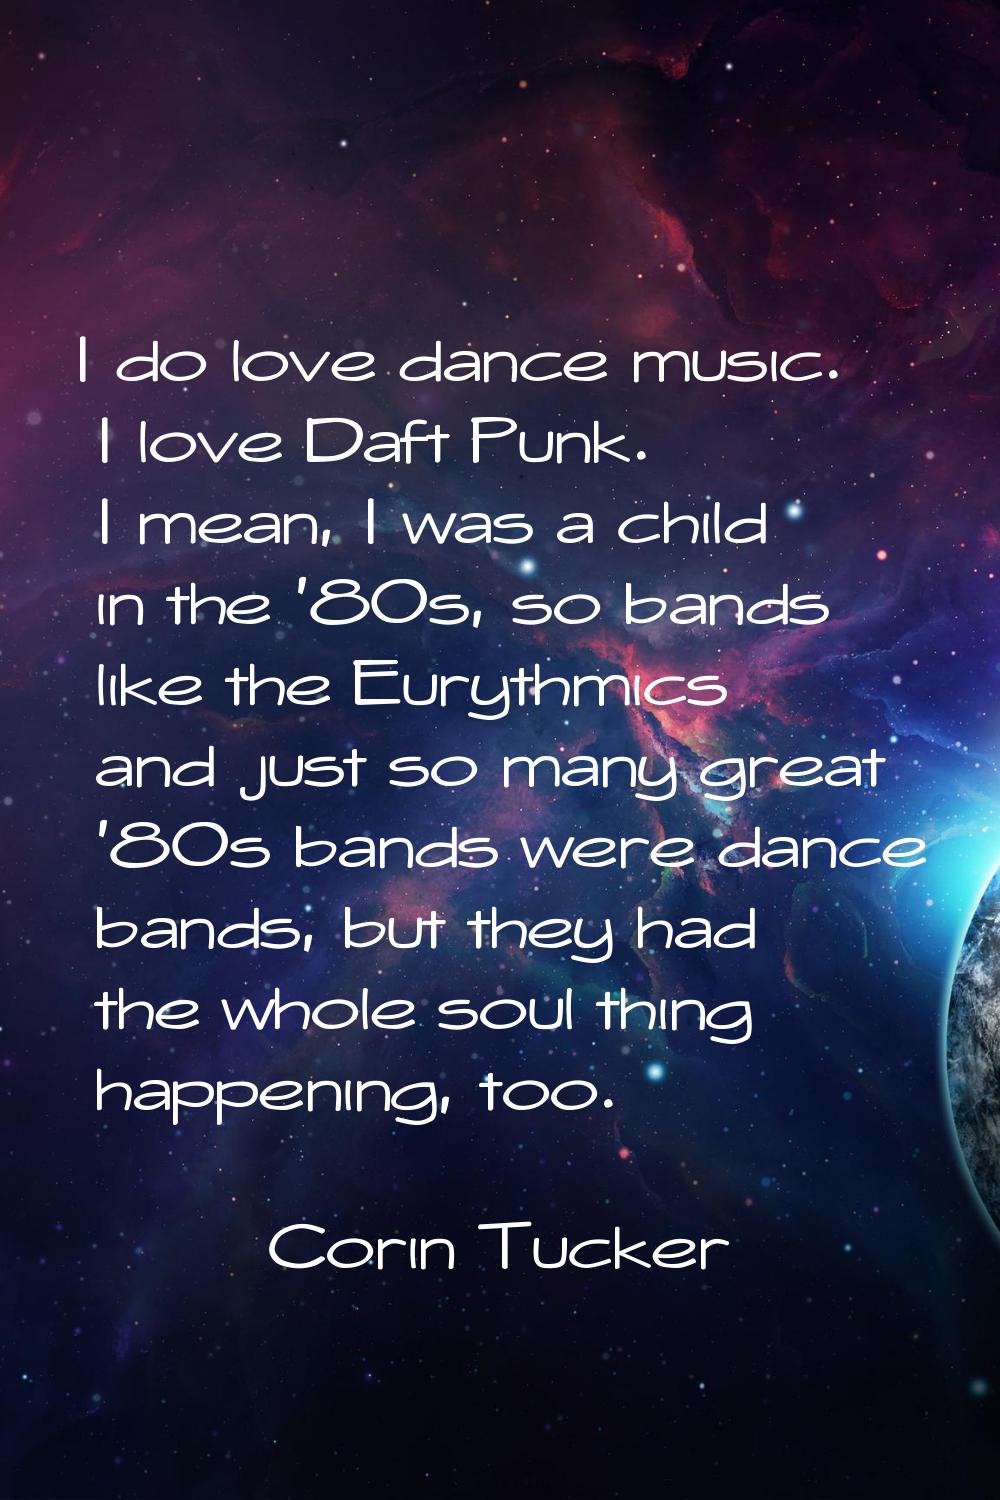 I do love dance music. I love Daft Punk. I mean, I was a child in the '80s, so bands like the Euryt